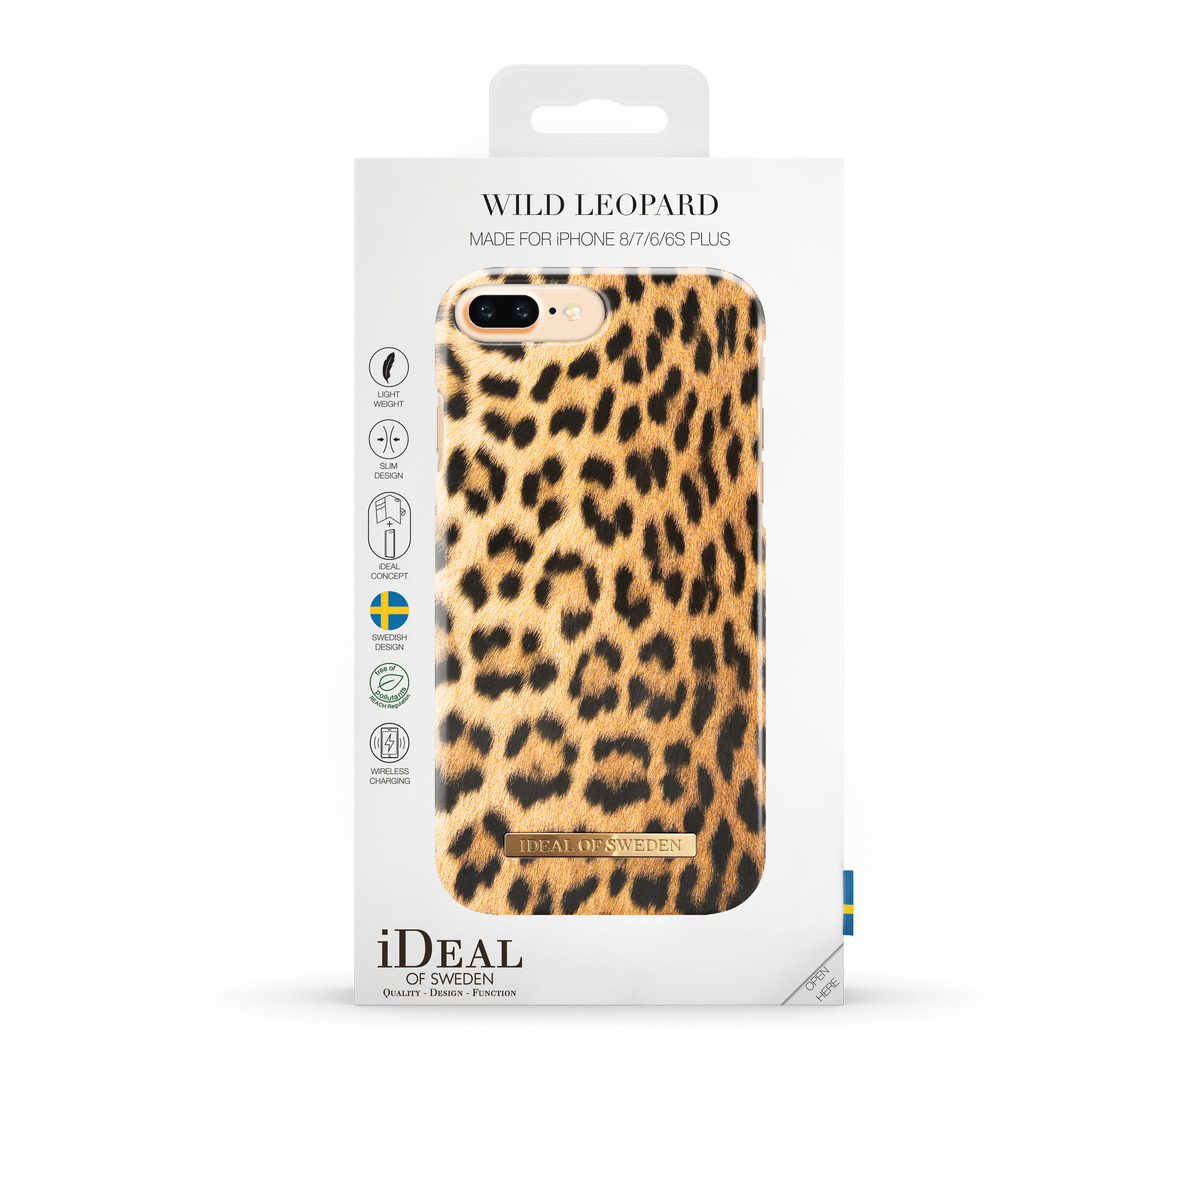 8 Apple, Fashion, Plus, SWEDEN OF Plus, 6 Leopard Plus iPhone 7 iPhone Backcover, ,iPhone Wild IDEAL